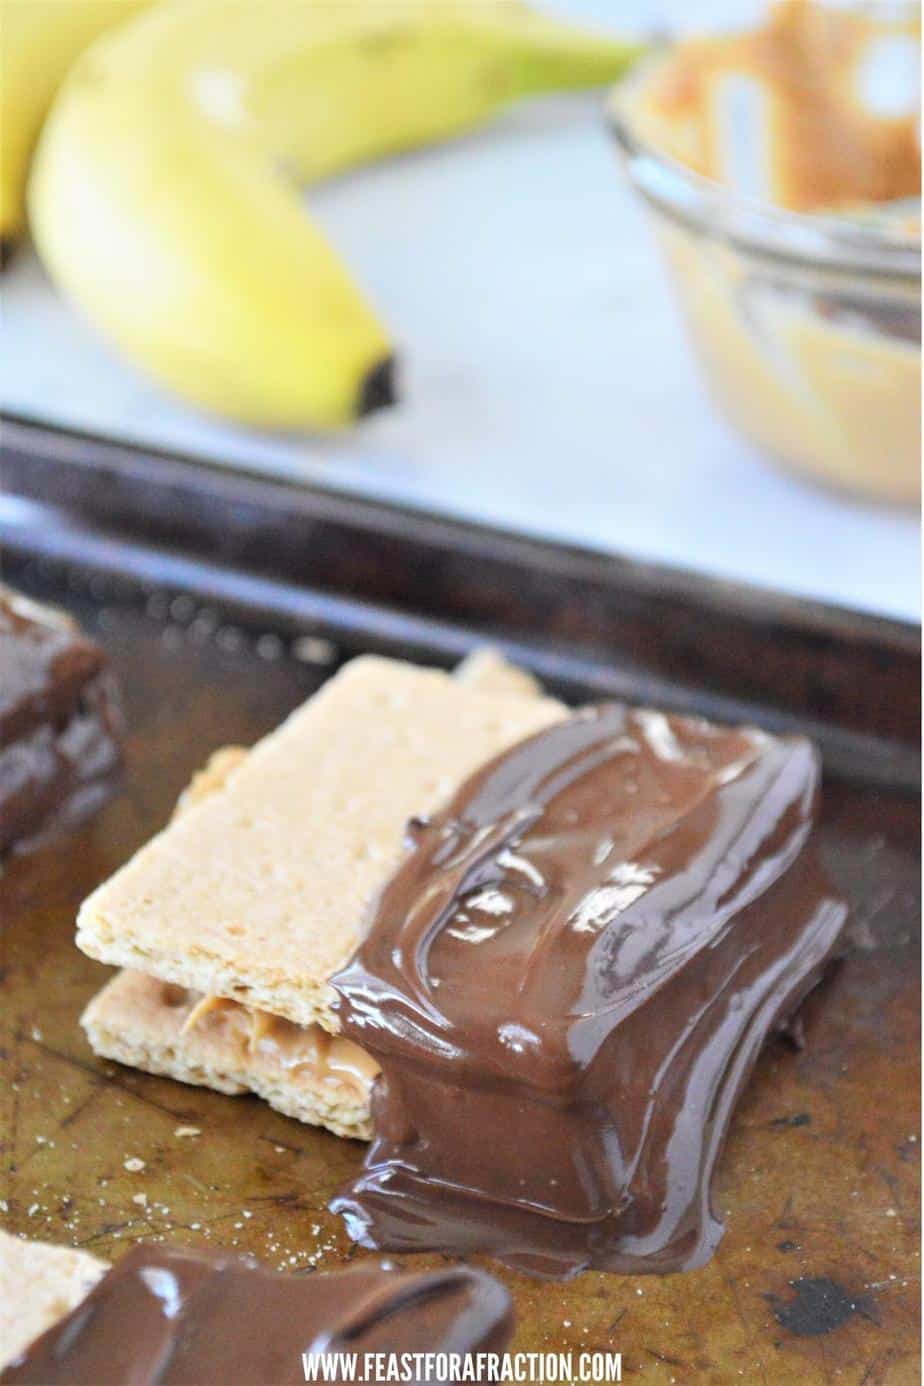 graham crackers with peanut butter and banana dipped in chocolate cooling on cookie sheet